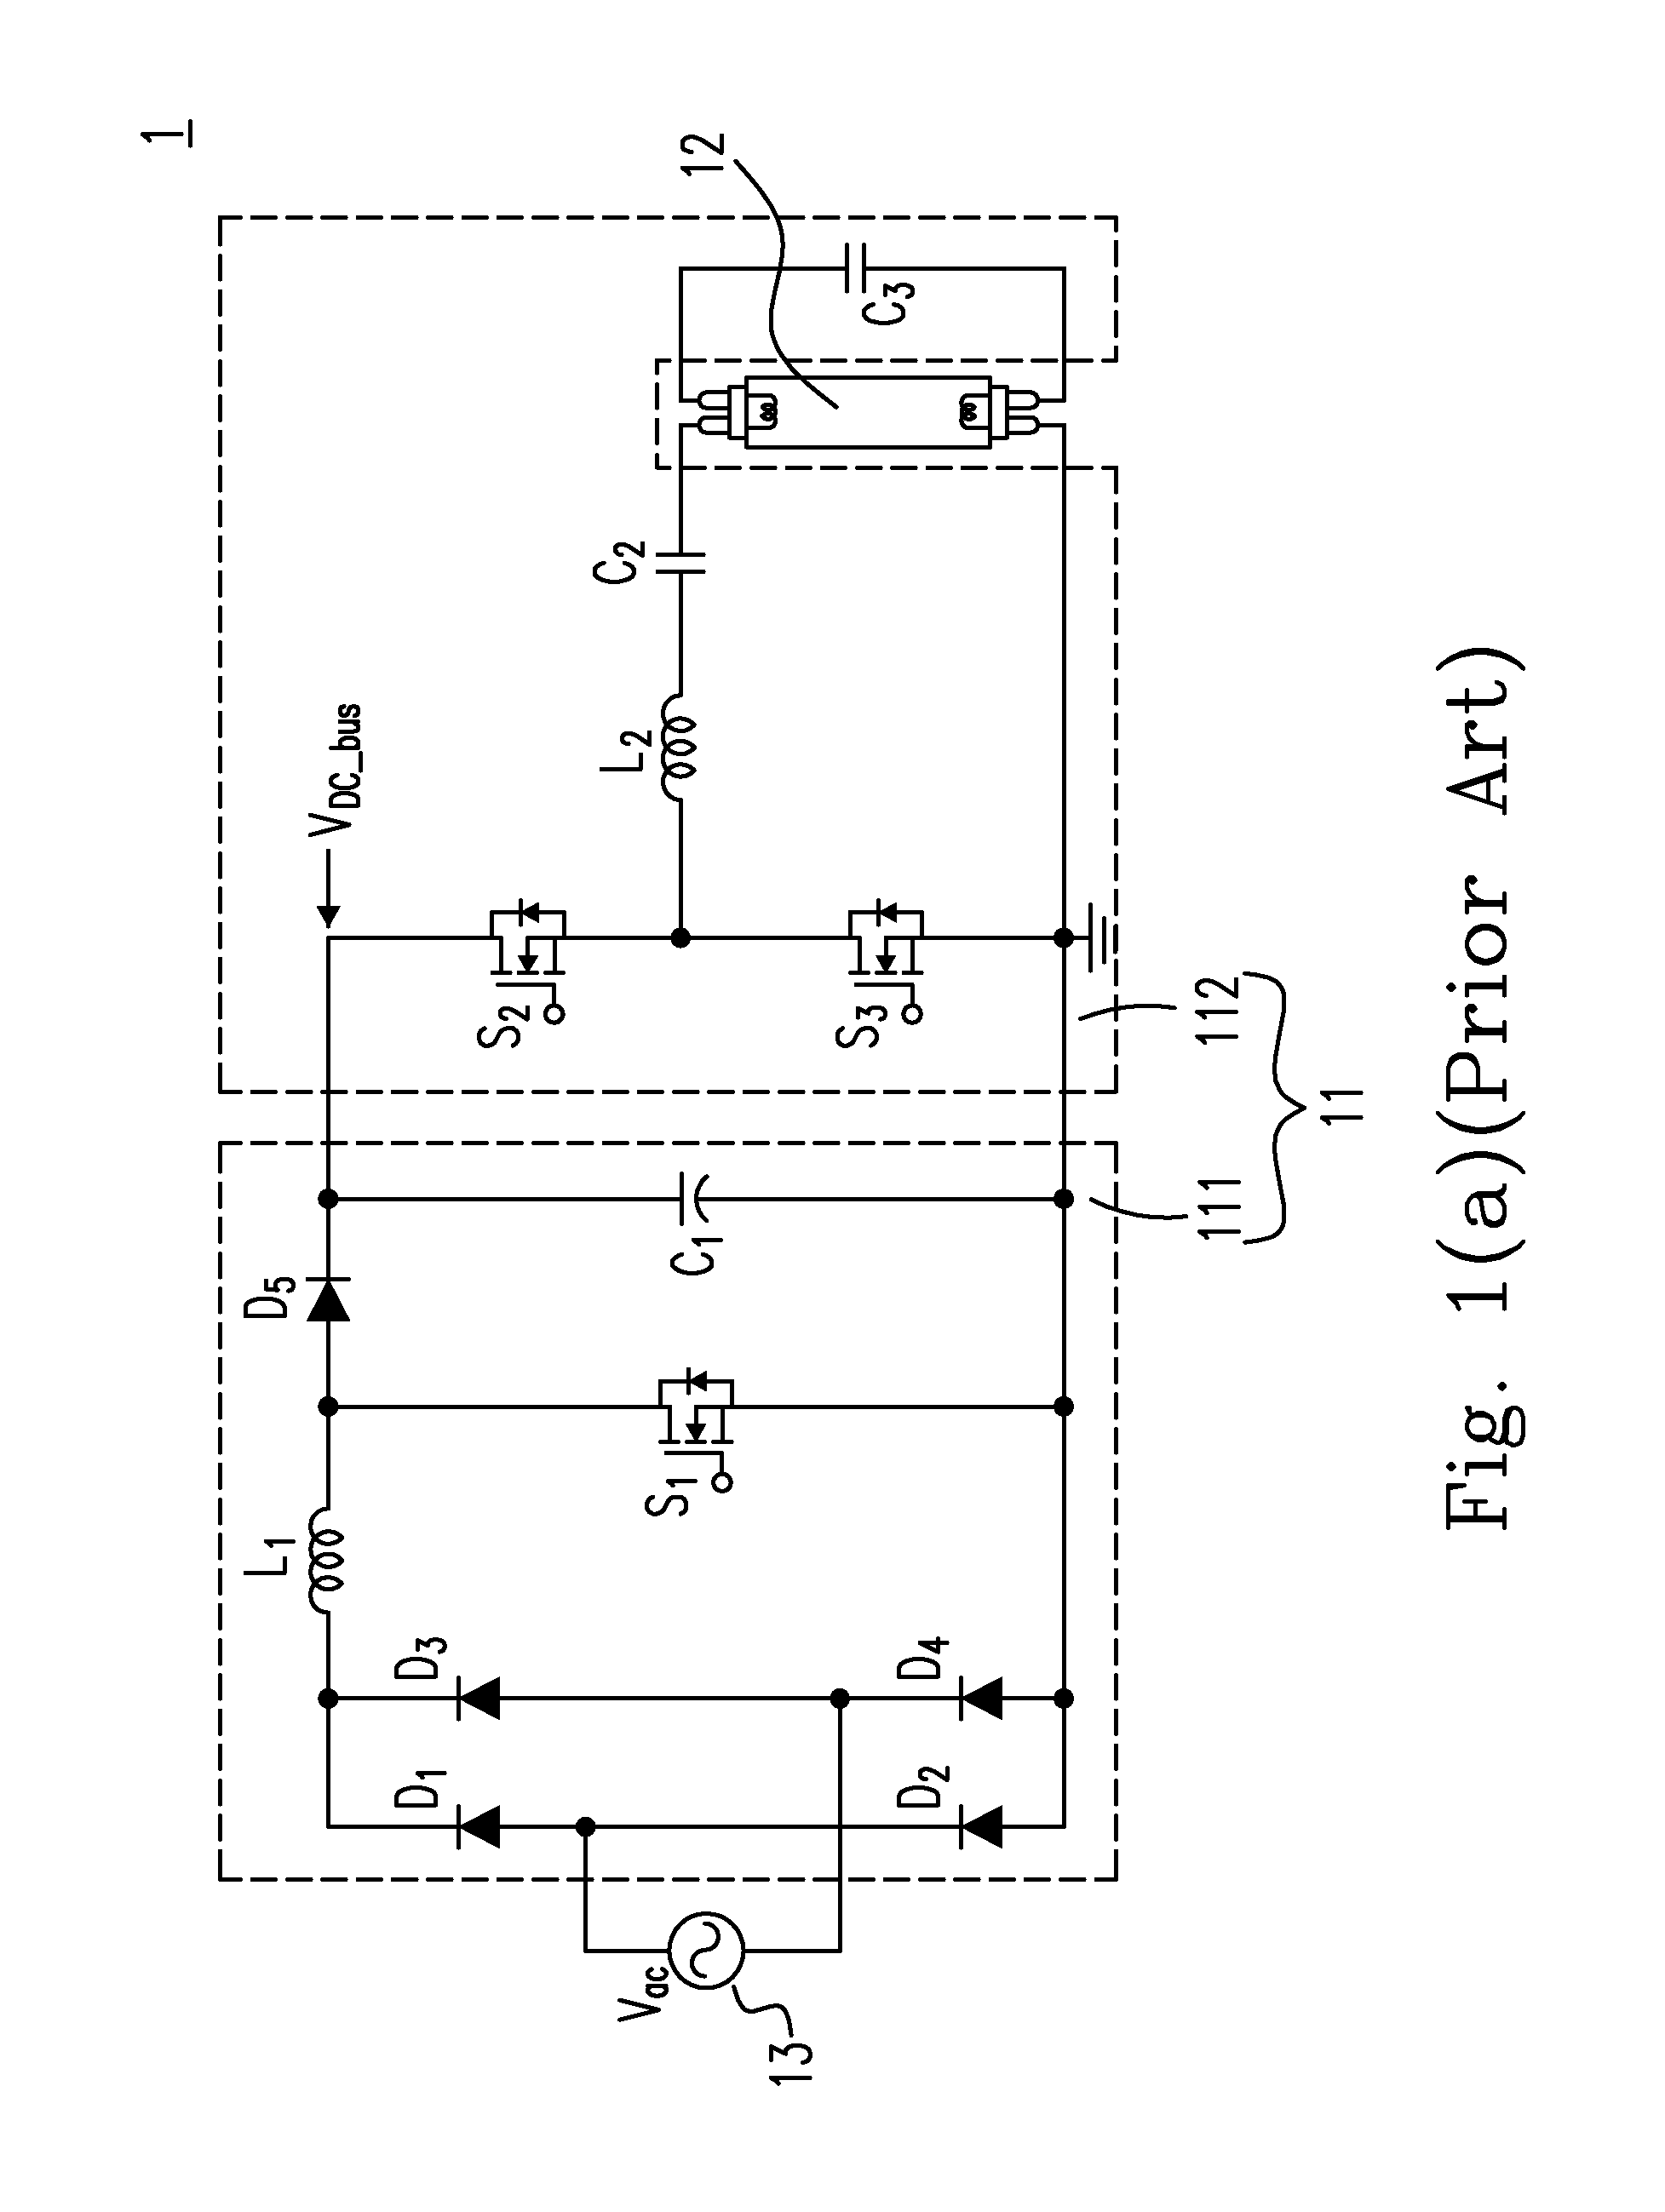 LED tube adapted for use with electronic ballast or ac mains and controlling method thereof